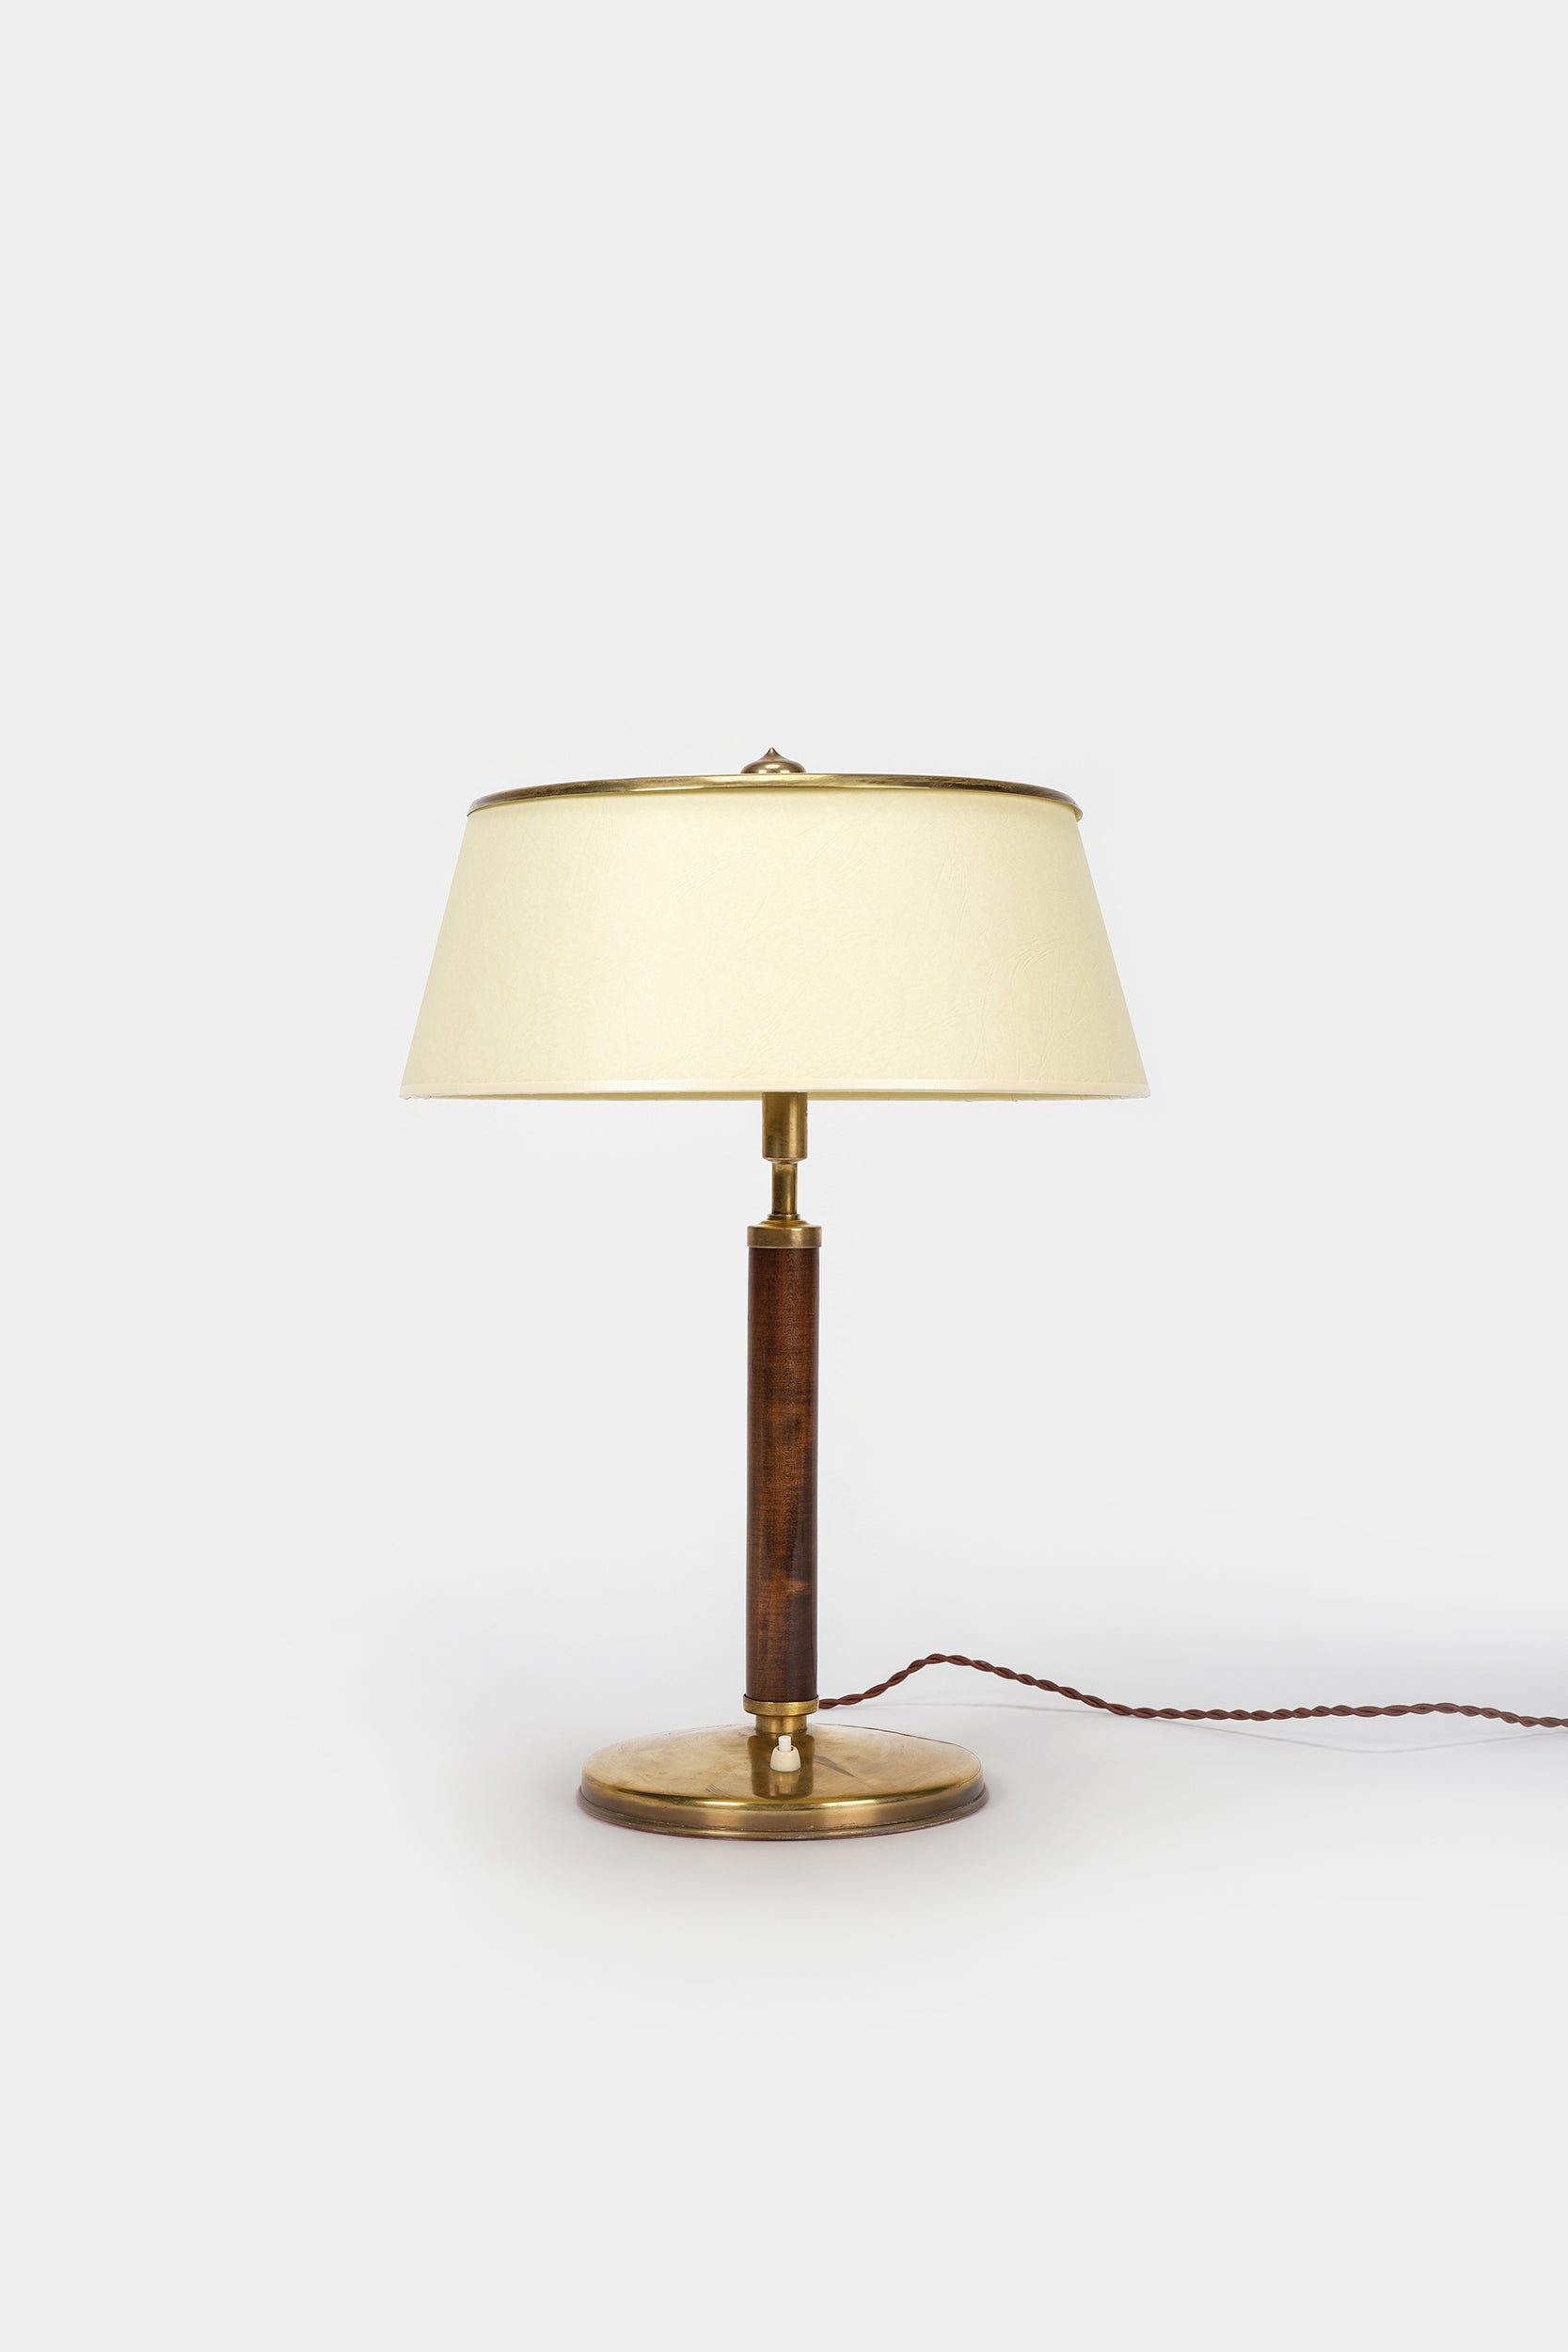 Alfred Müller, Table Lamp, Brass and Walnut, 30s